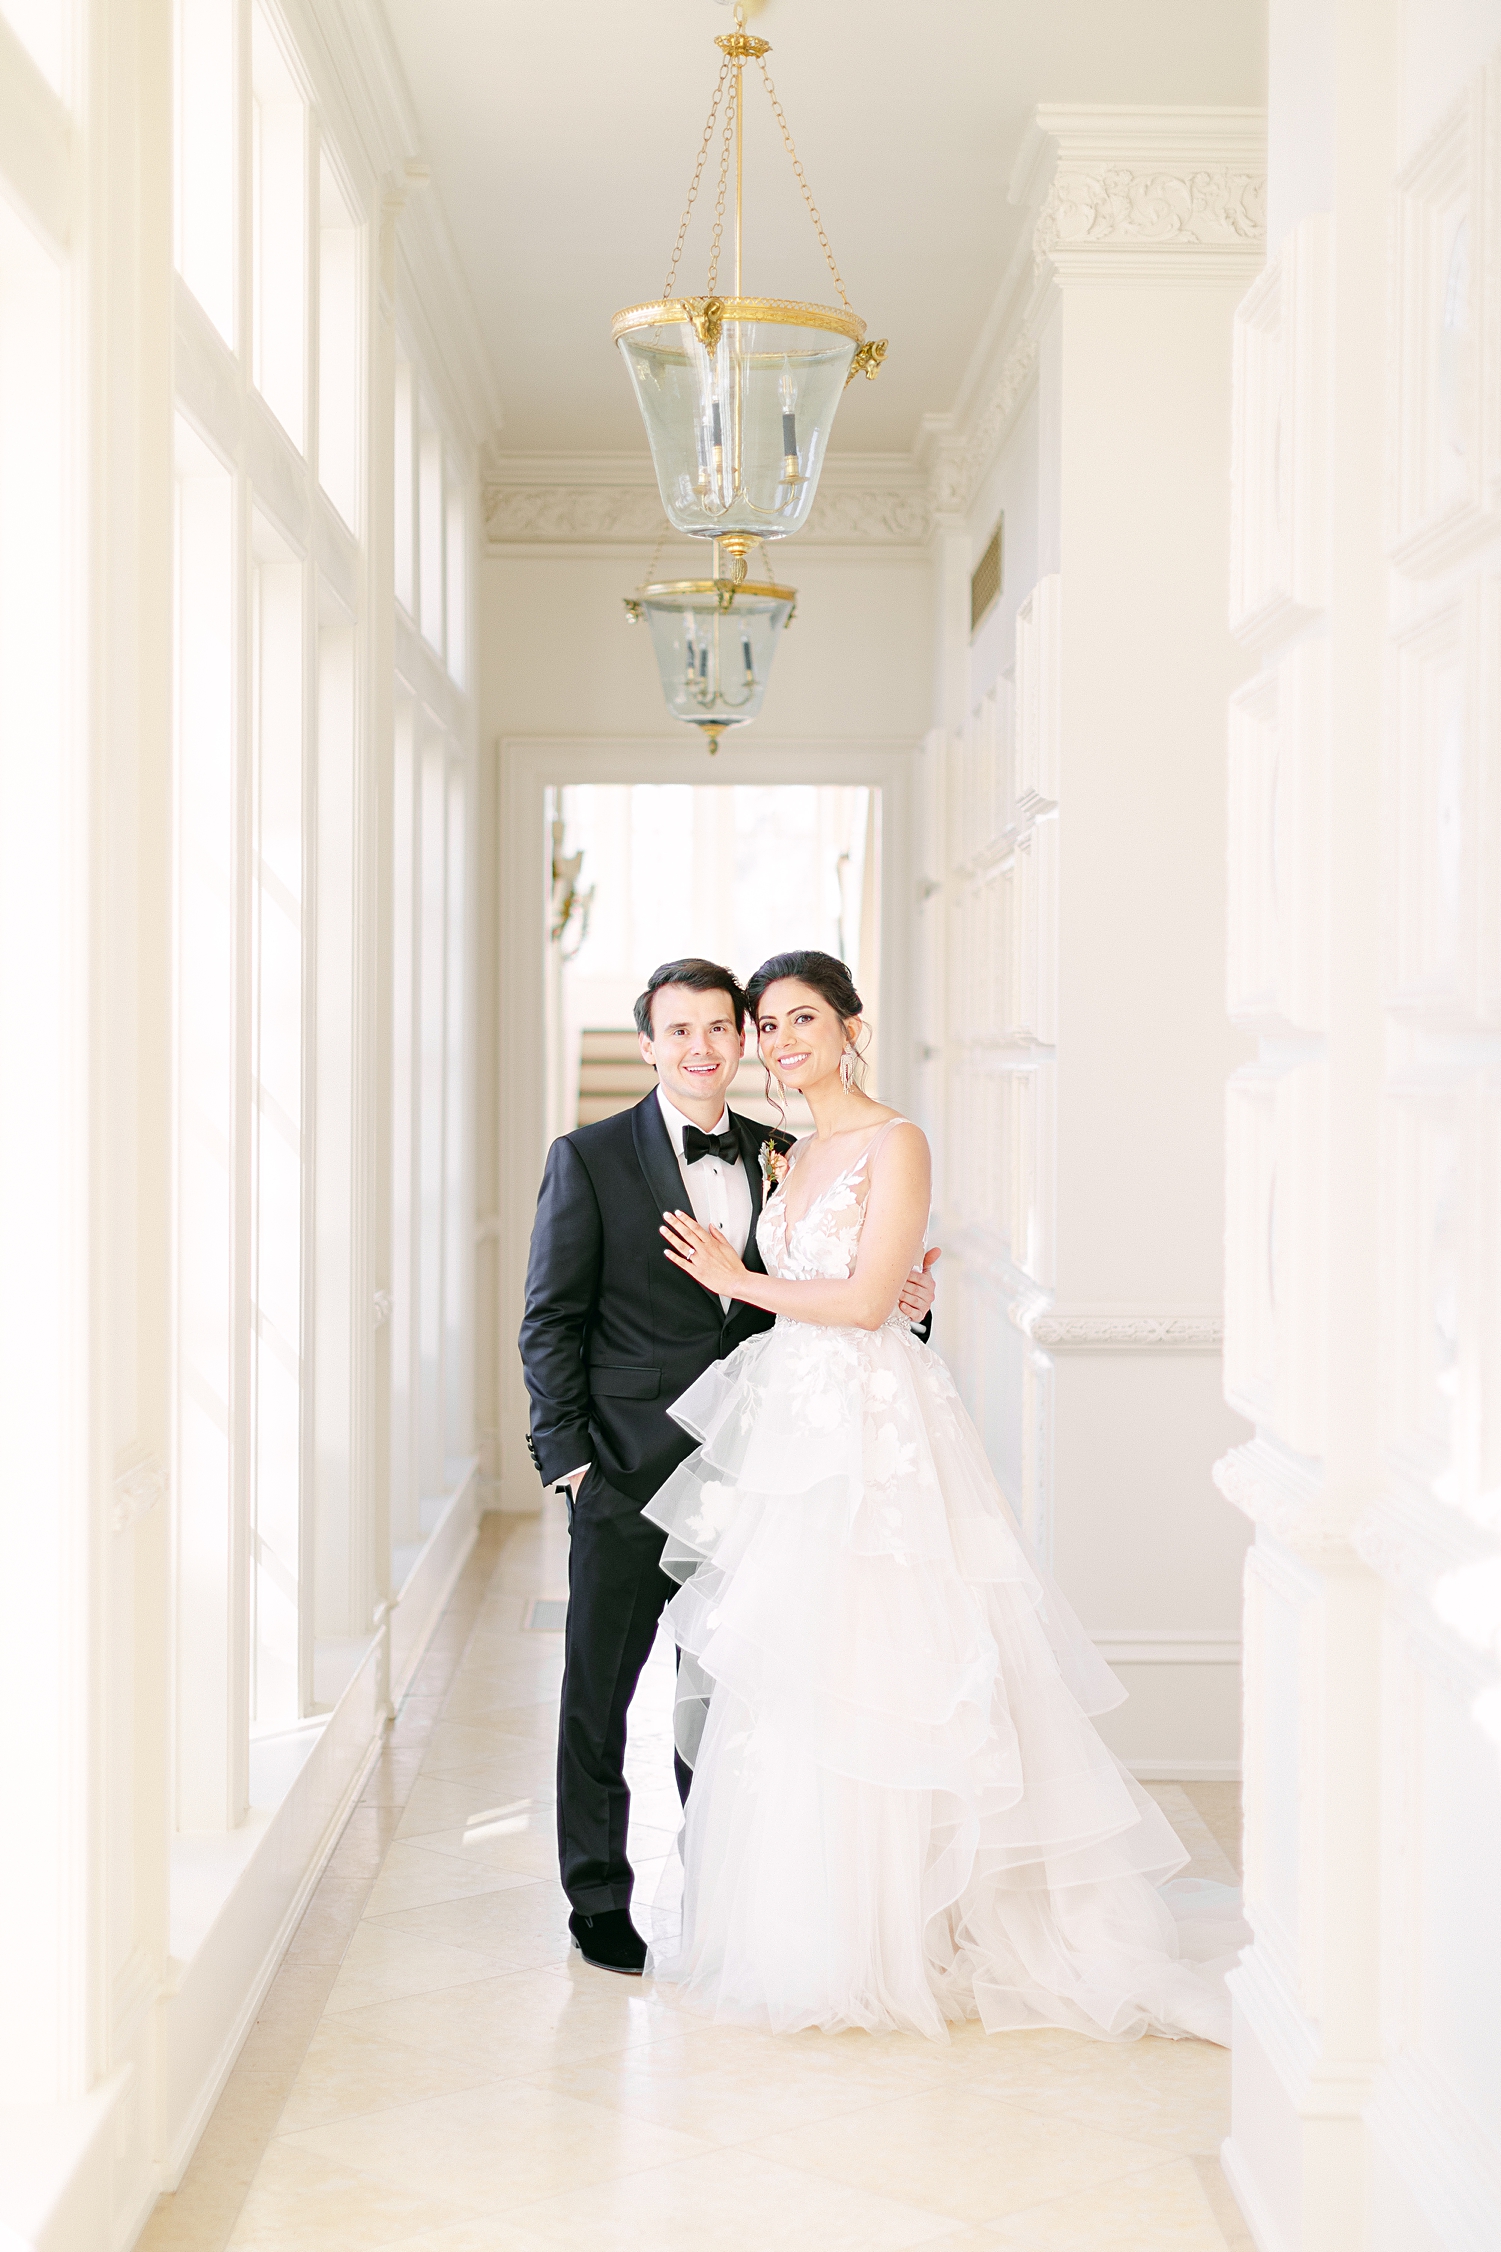 Bride and groom standing in white hallway wedding smiling